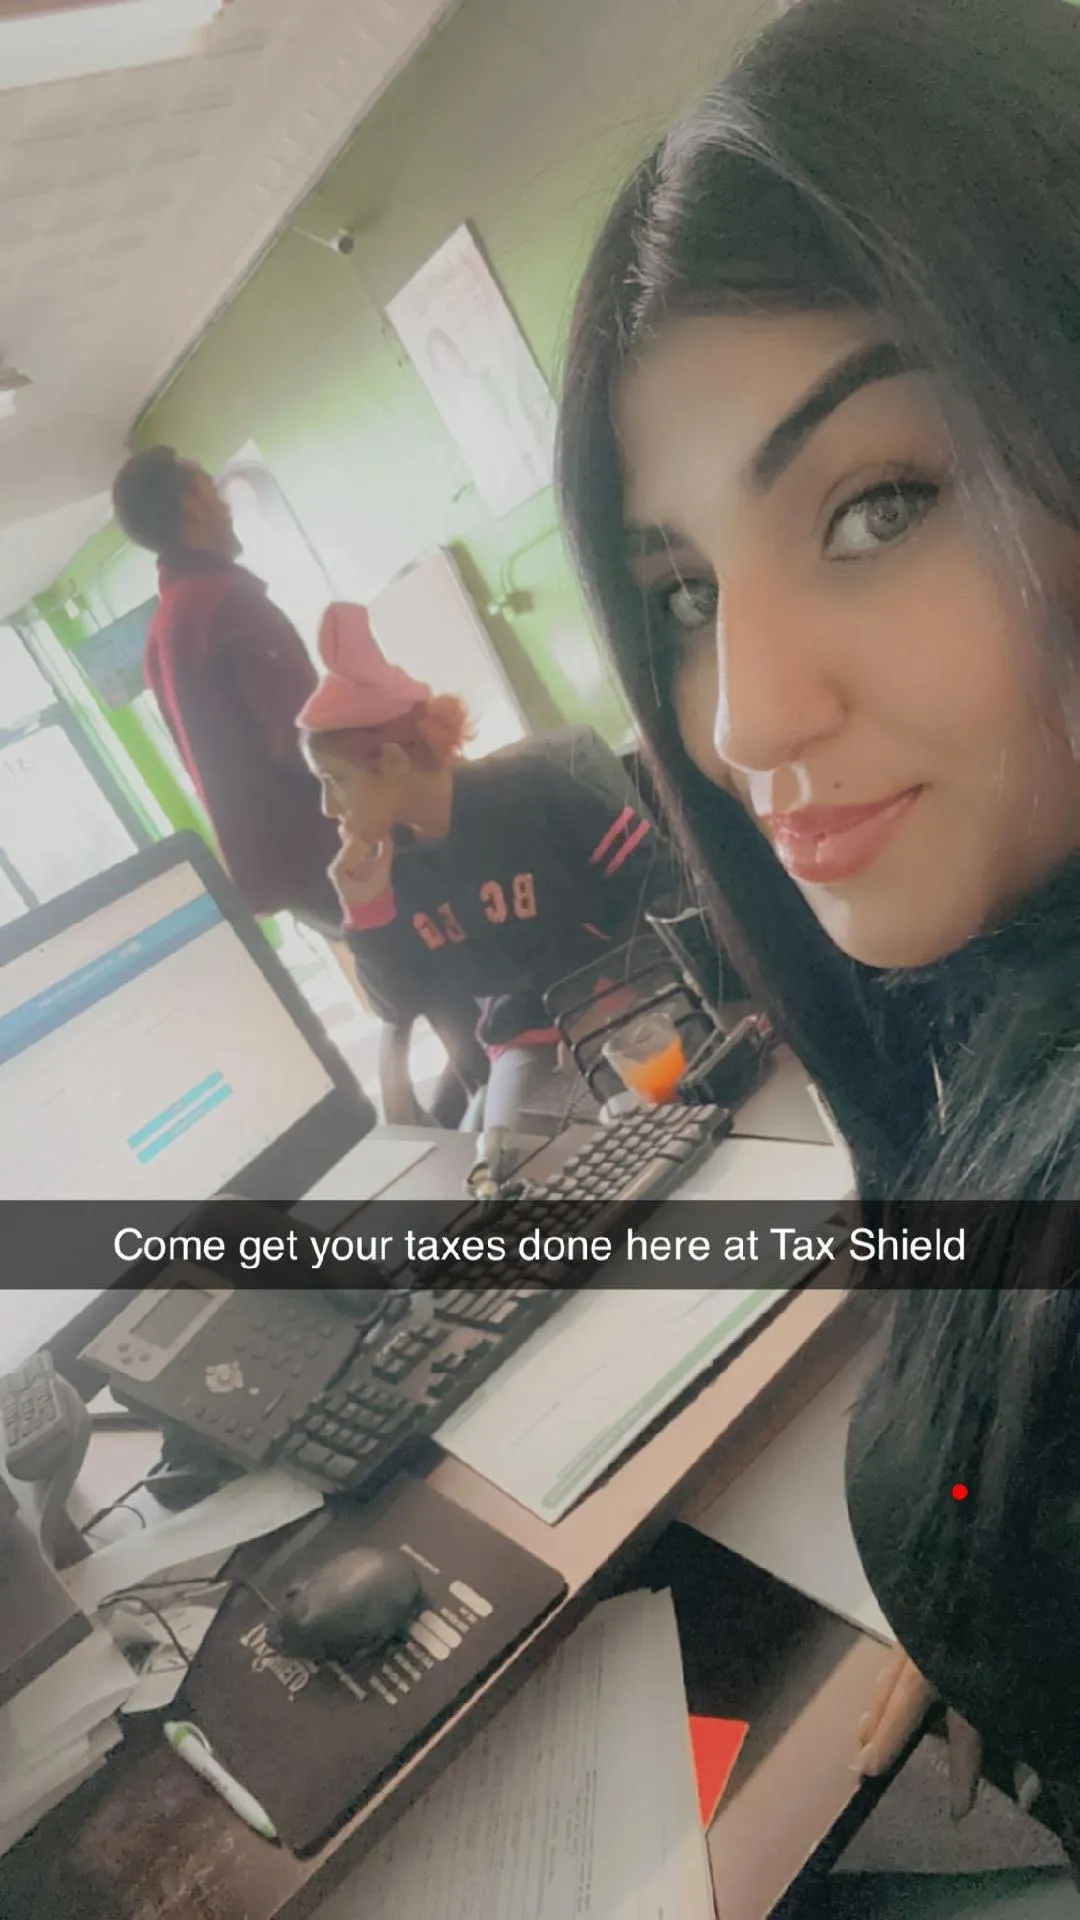 Come get your taxes done here a Tax shield